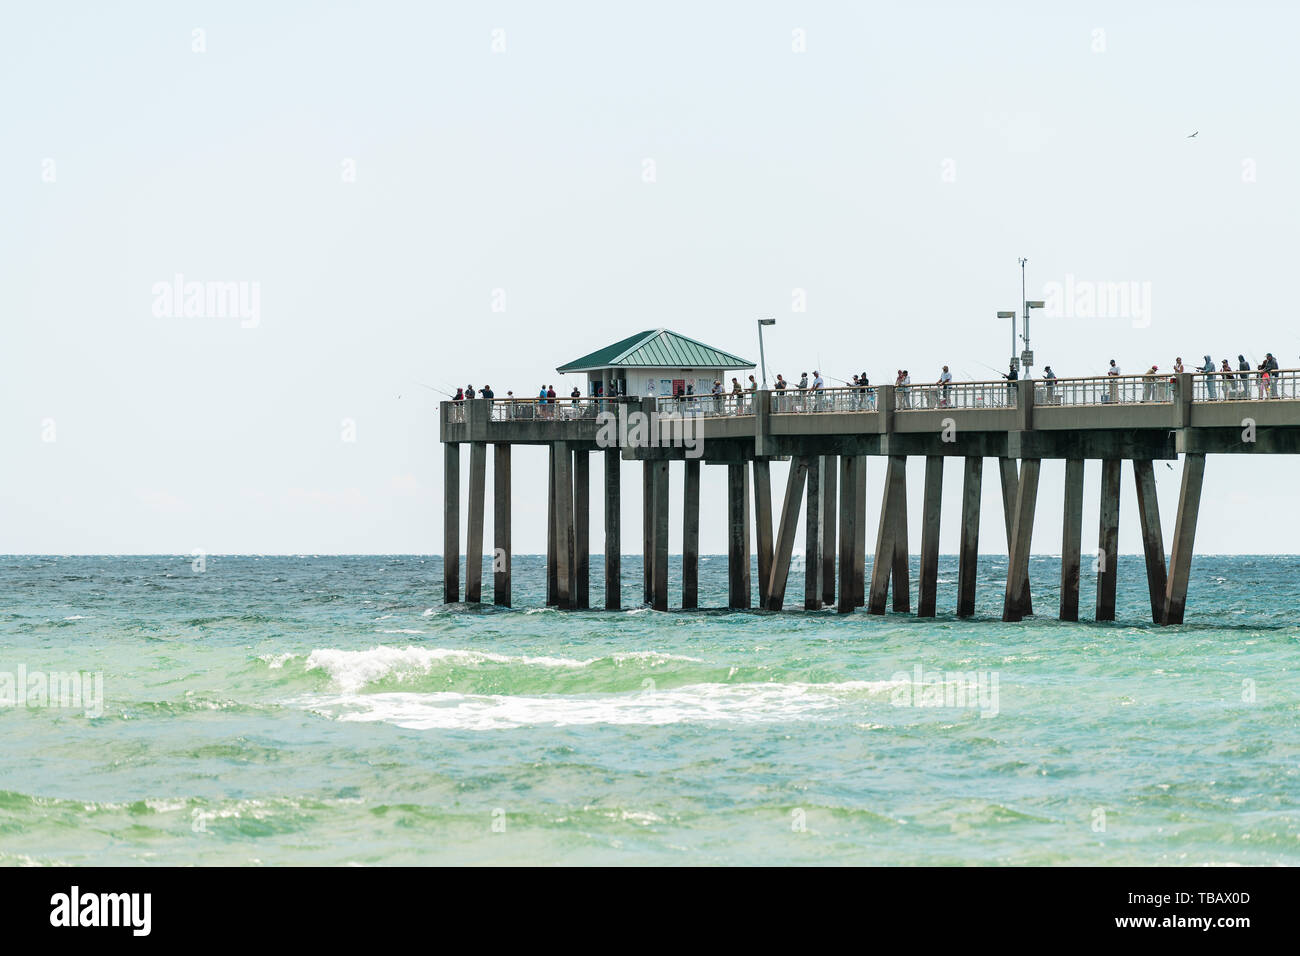 Fort Walton Beach, USA - April 24, 2081: Closeup of Okaloosa Island fishing pier in Florida in Panhandle Gulf of Mexico during sunny day with waves an Stock Photo